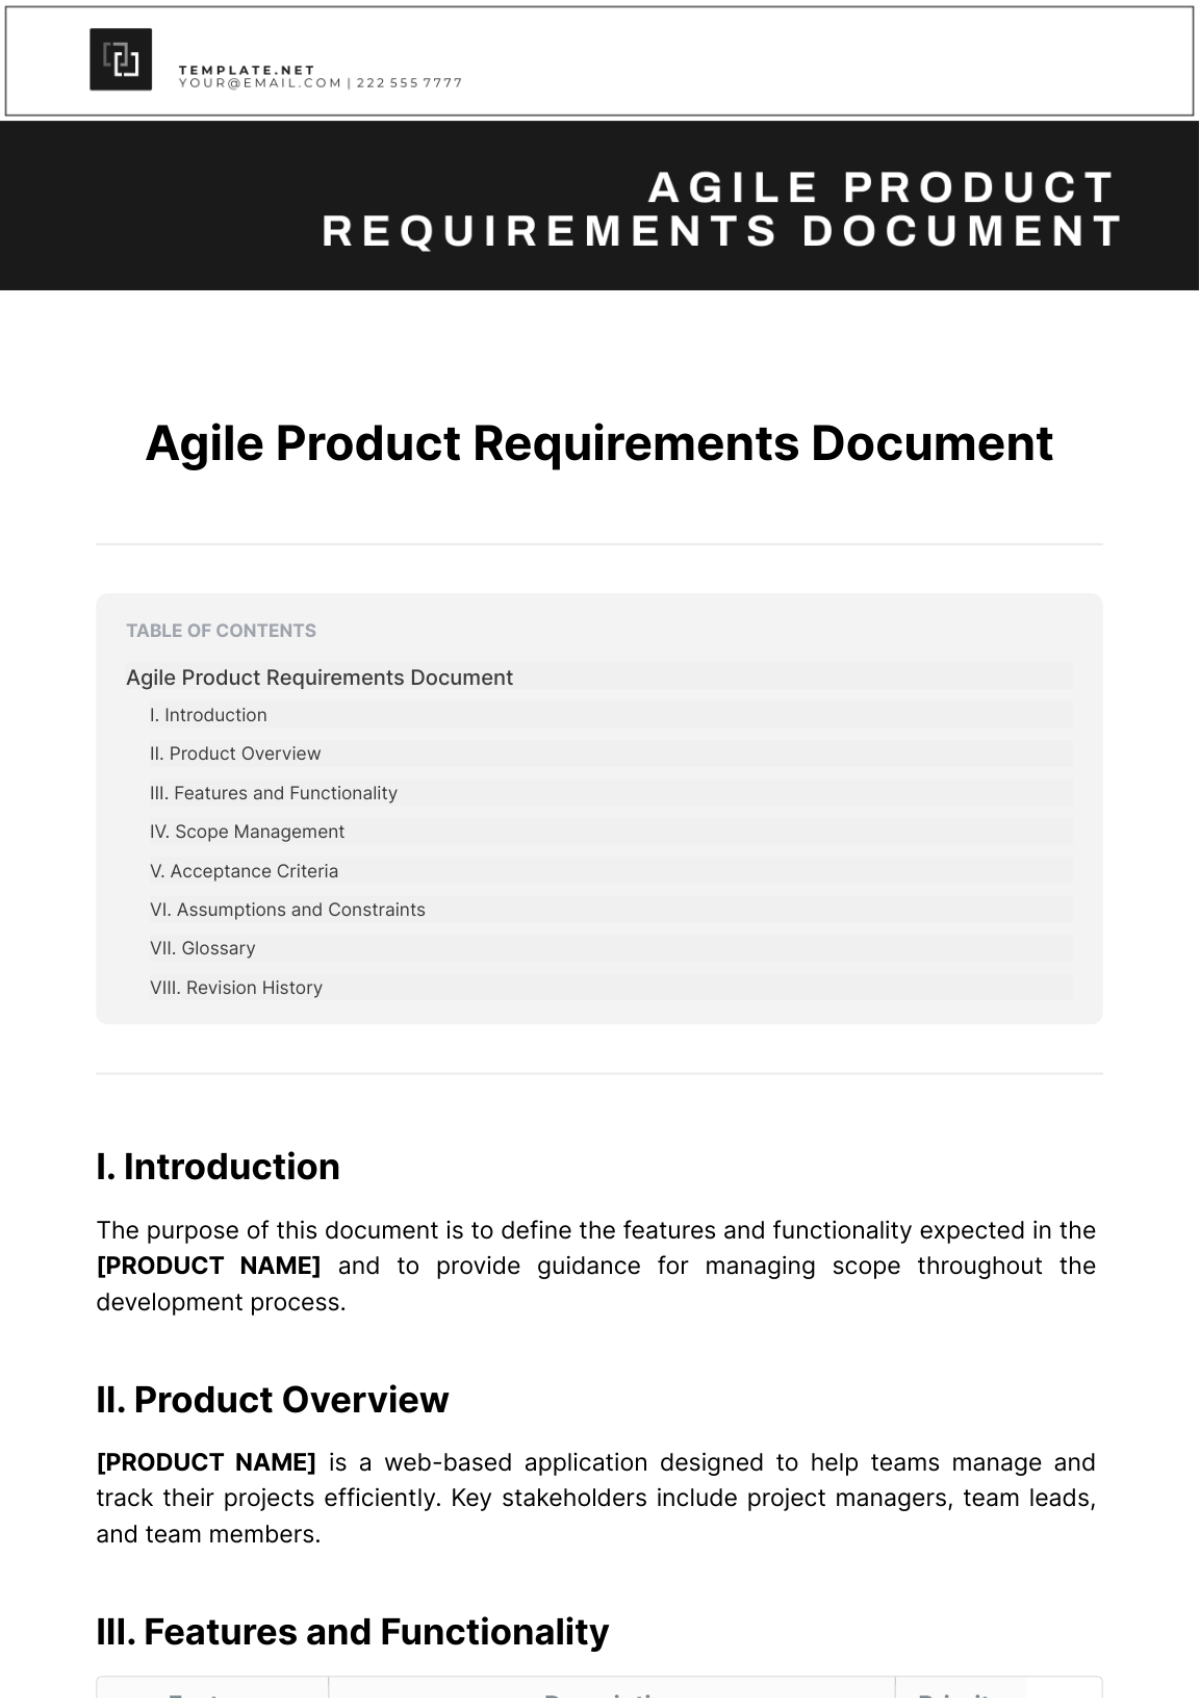 Agile Product Requirements Document Template